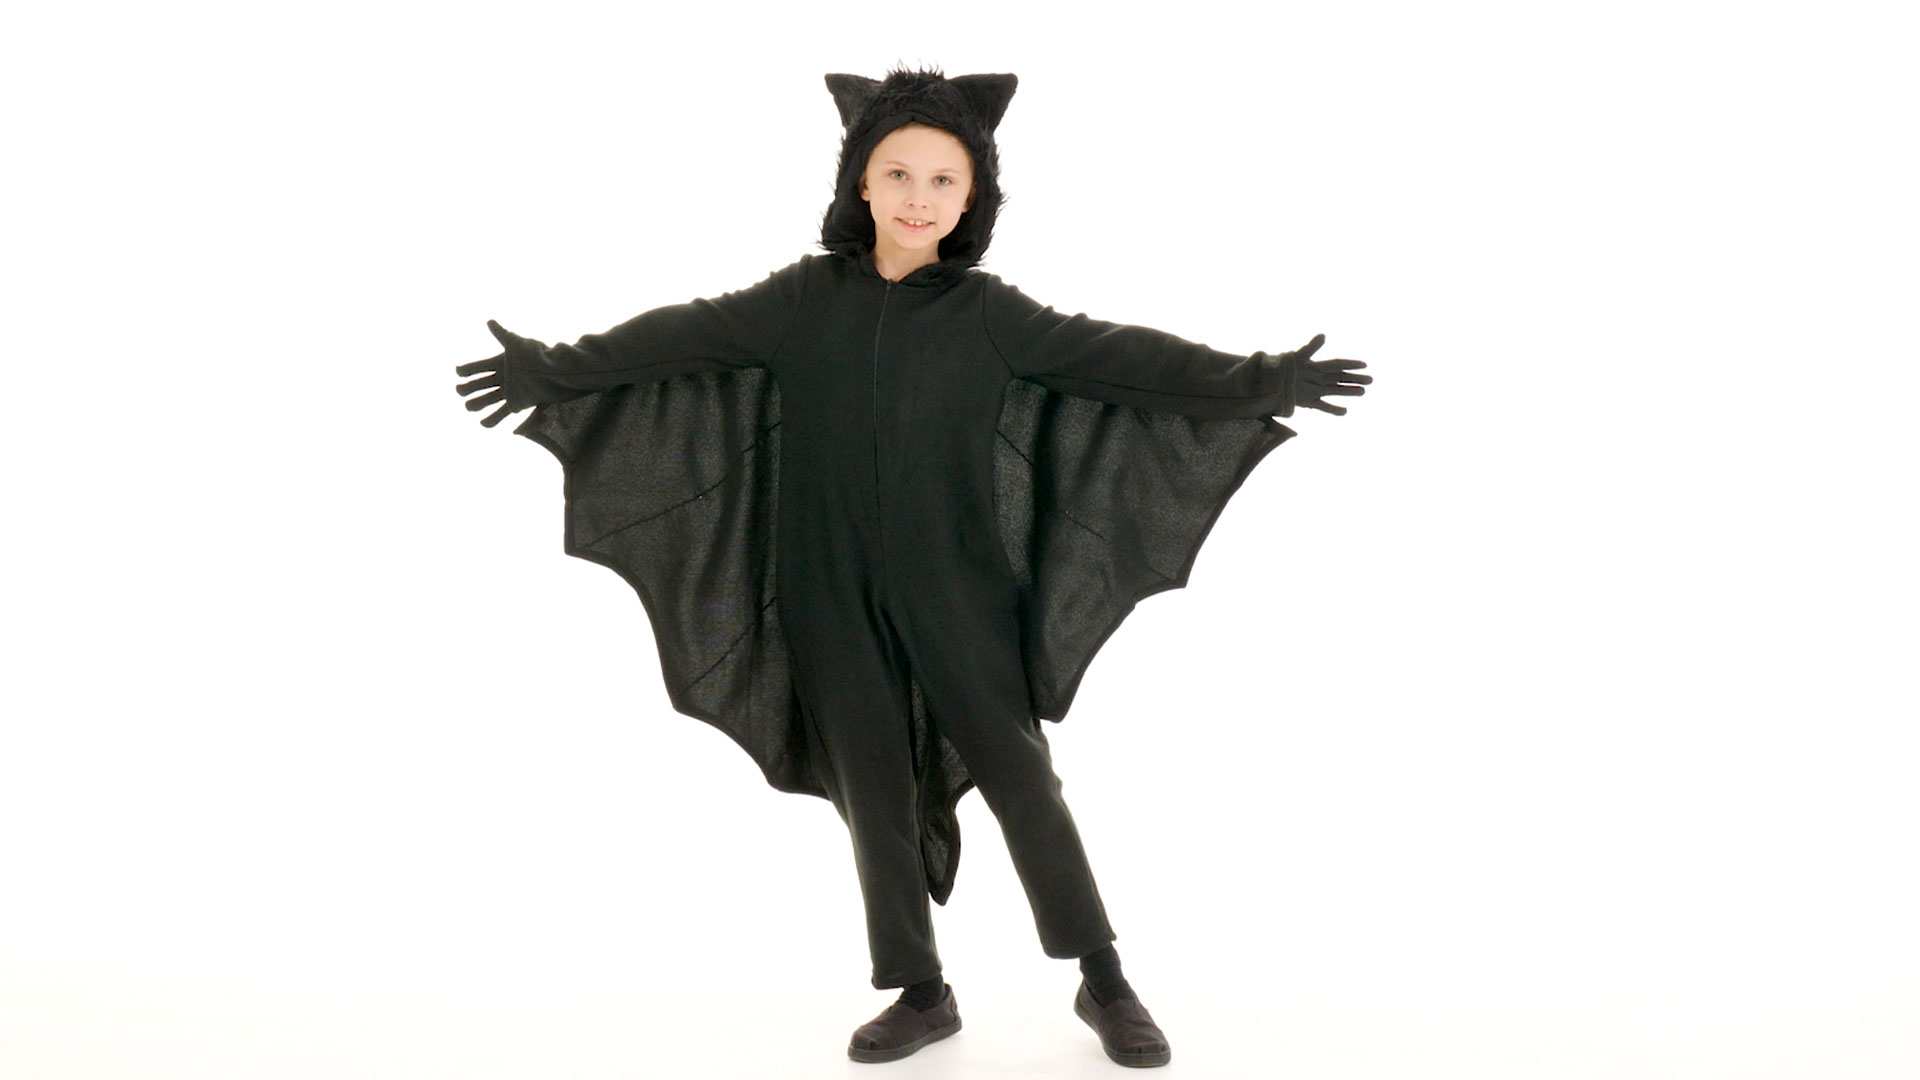 Look who just popped out of the darkness. This Child Fleece Bat Costume is perfect for young bat lovers.